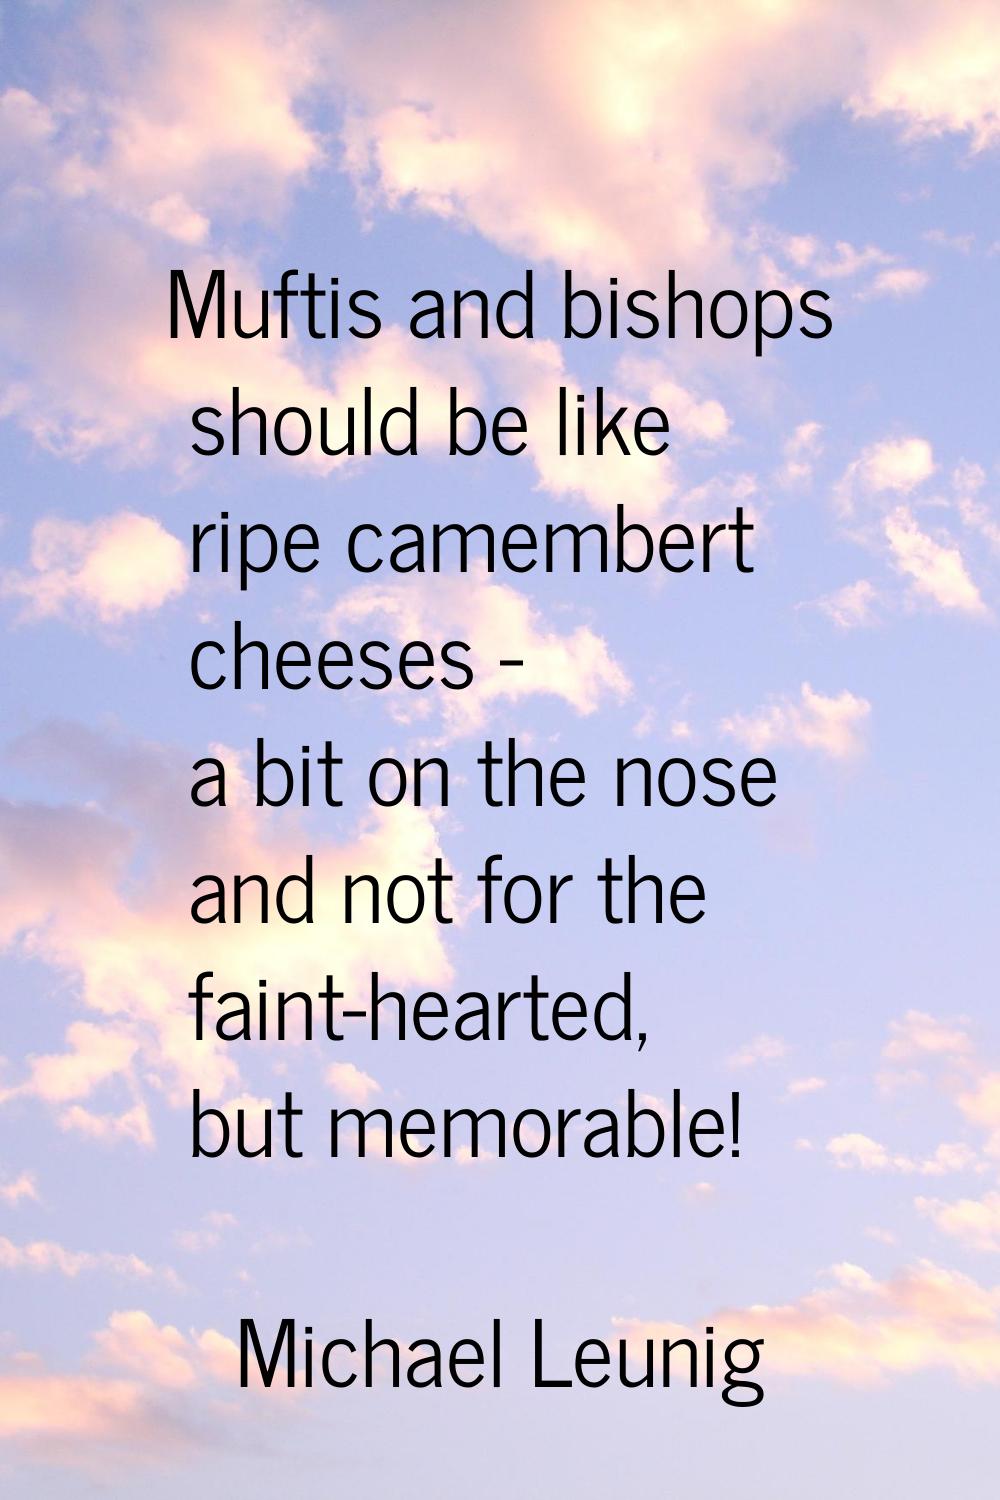 Muftis and bishops should be like ripe camembert cheeses - a bit on the nose and not for the faint-